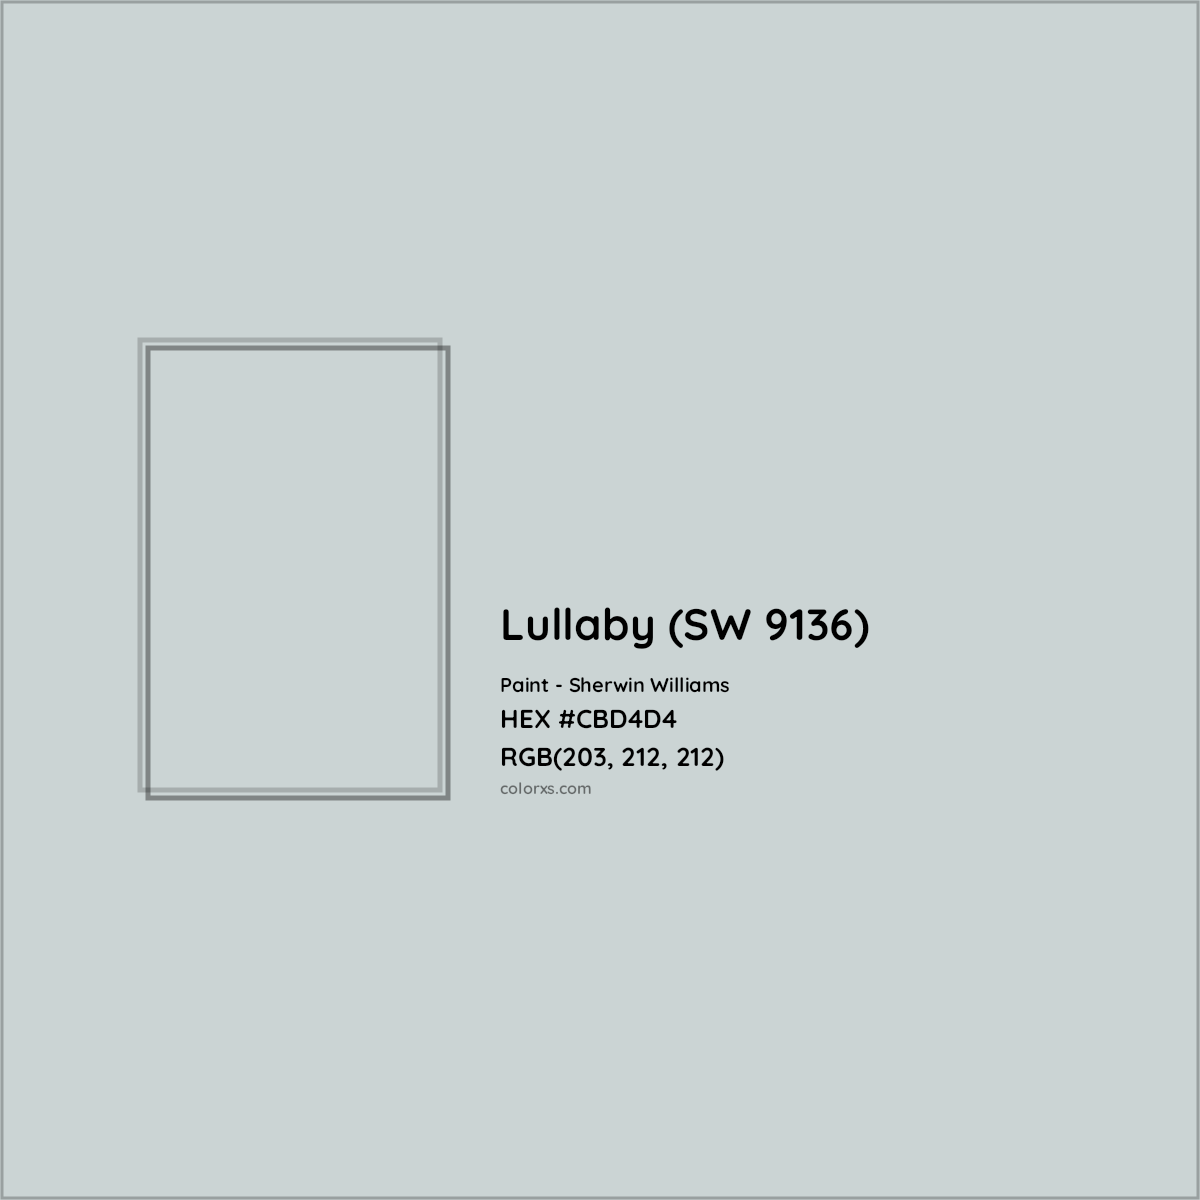 HEX #CBD4D4 Lullaby (SW 9136) Paint Sherwin Williams - Color Code